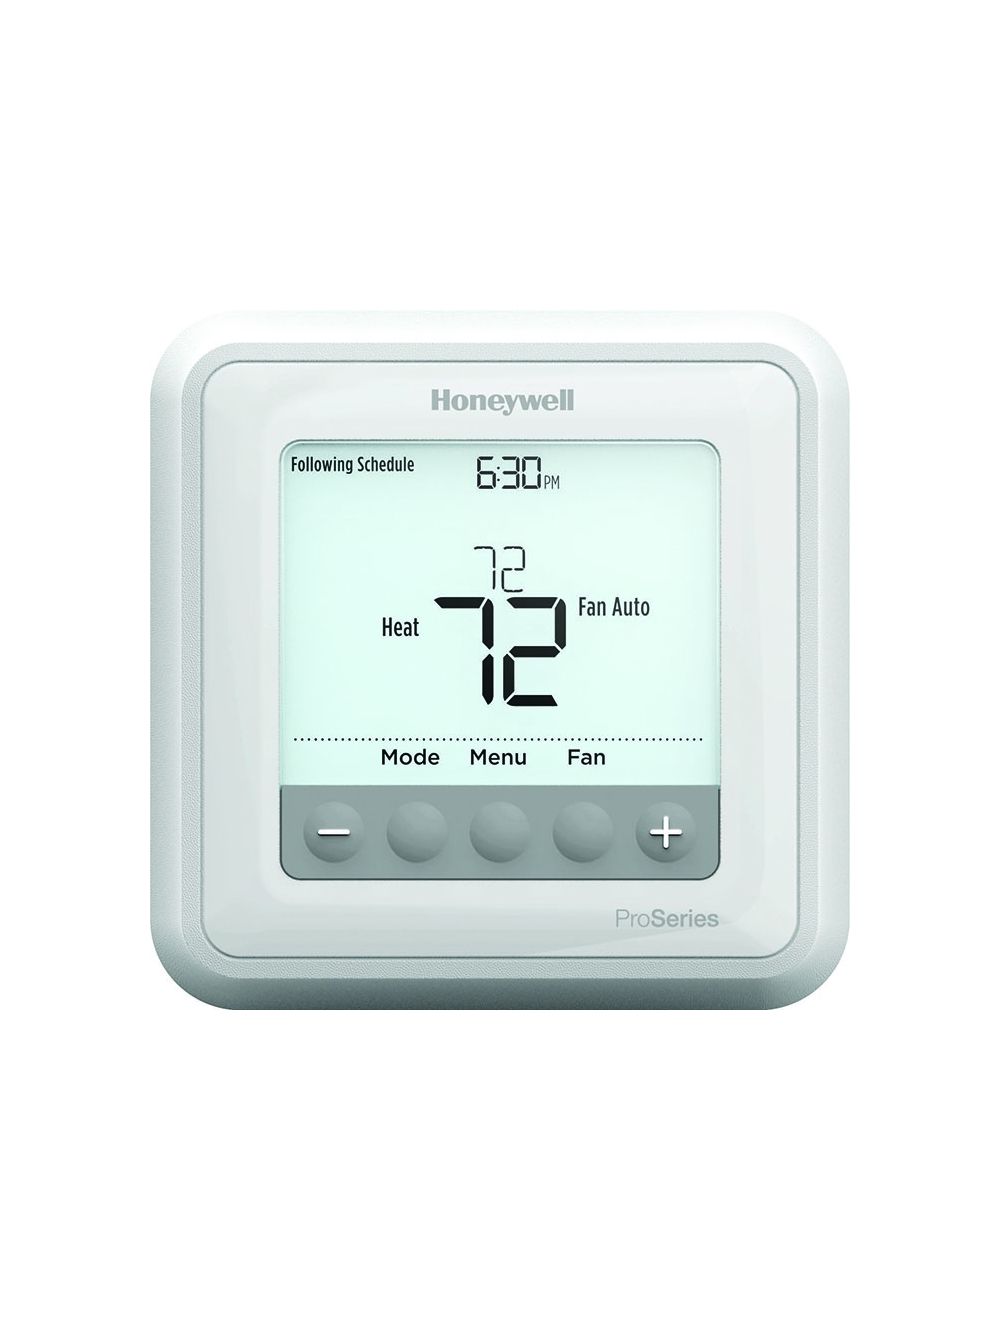 Honeywell T4 Pro Series Programmable Thermostat 1C/2H